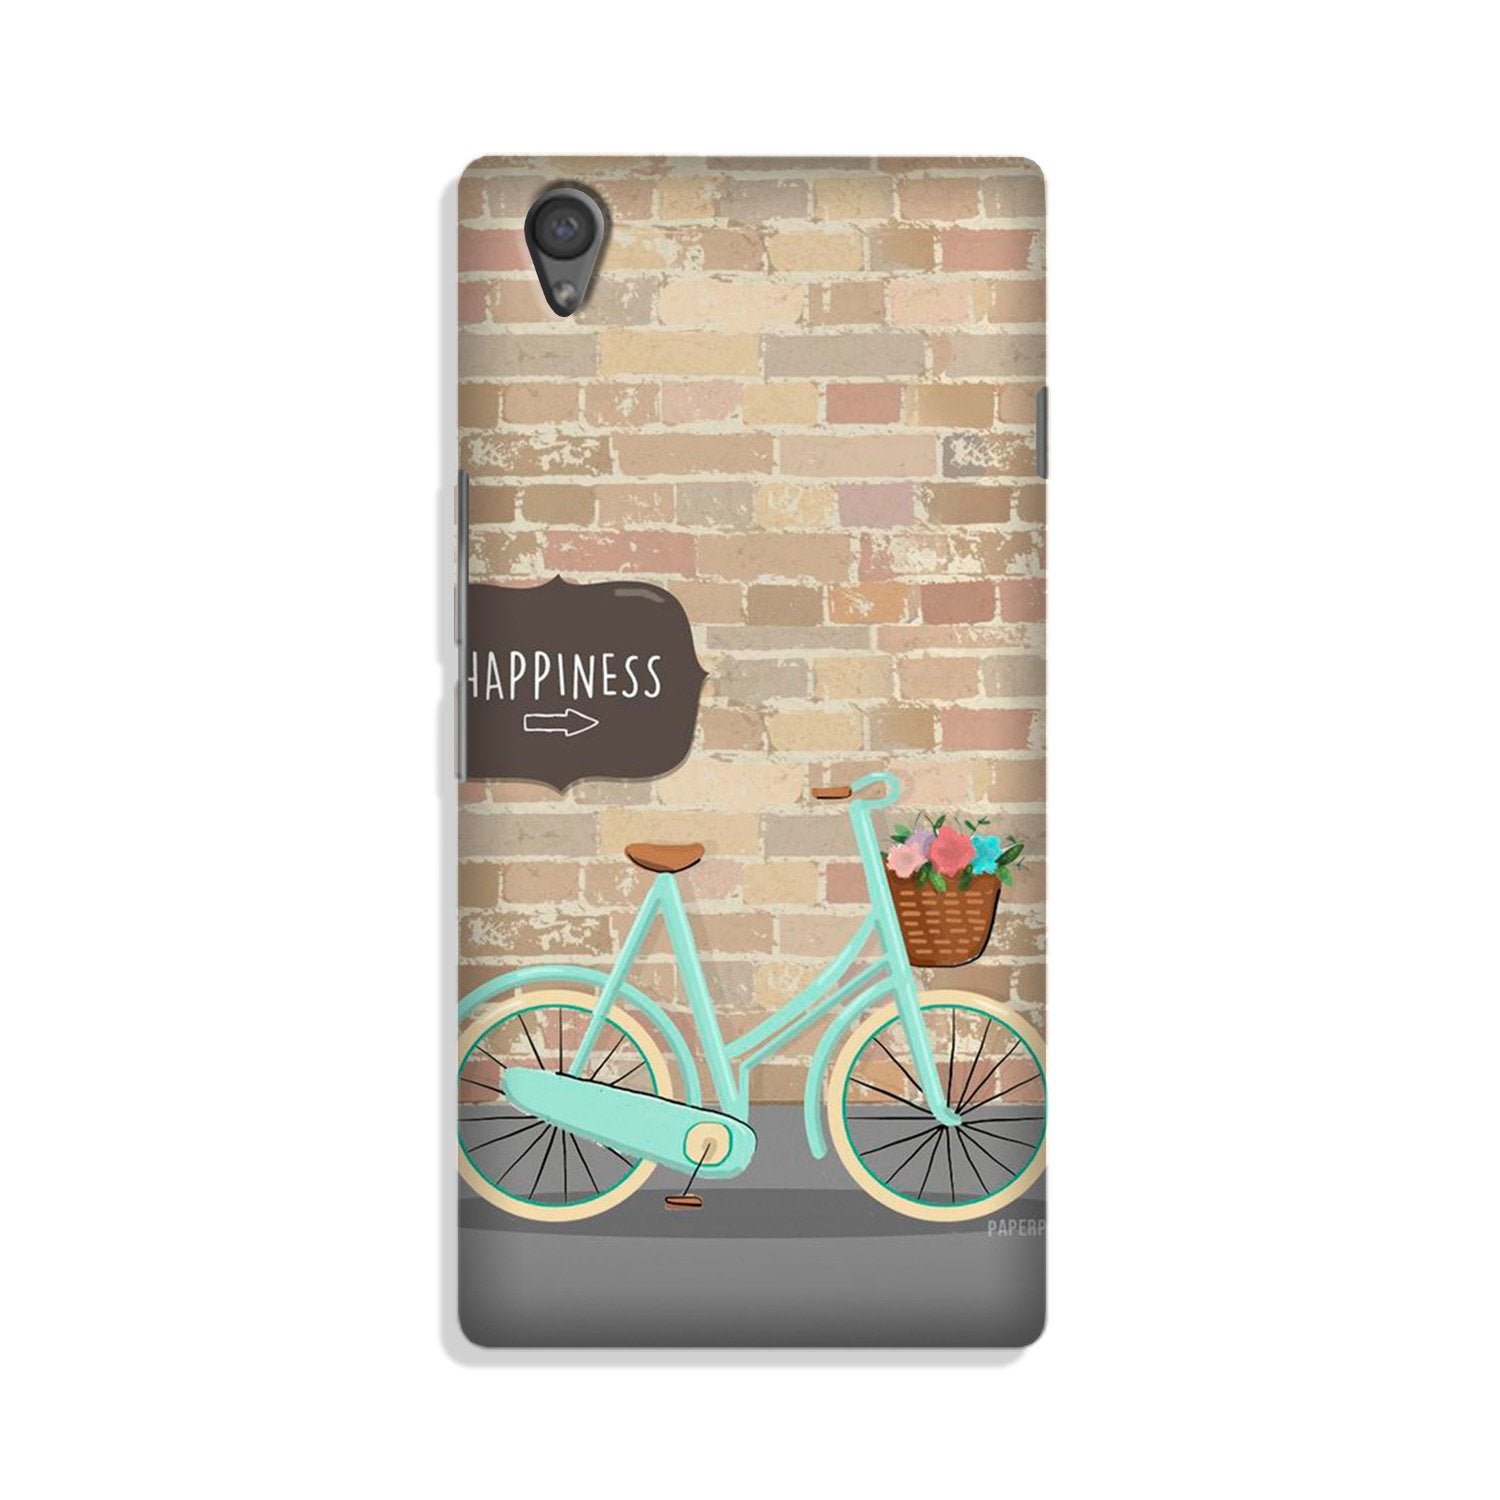 Happiness Case for Vivo Y51L